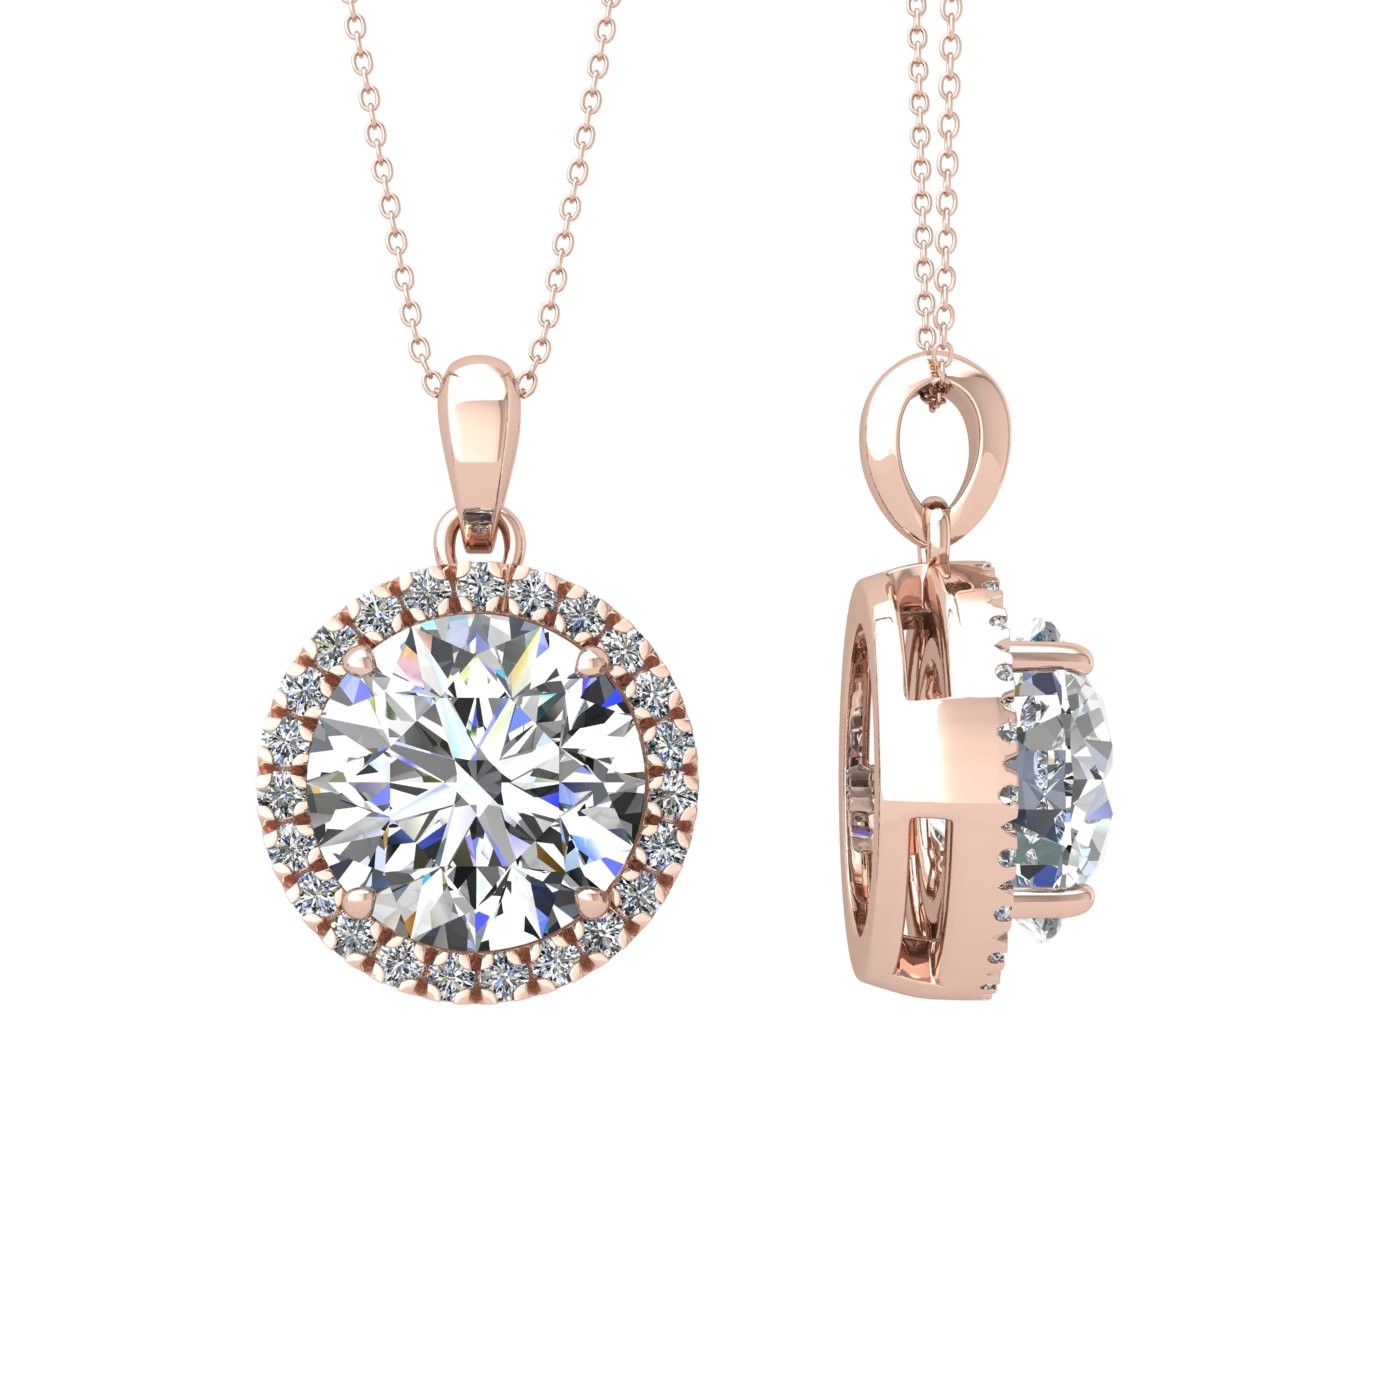 18k rose gold  2 ct 4 prong round shape diamond pendant with diamond pavÉ set halo including chain seperate from the pendant Photos & images